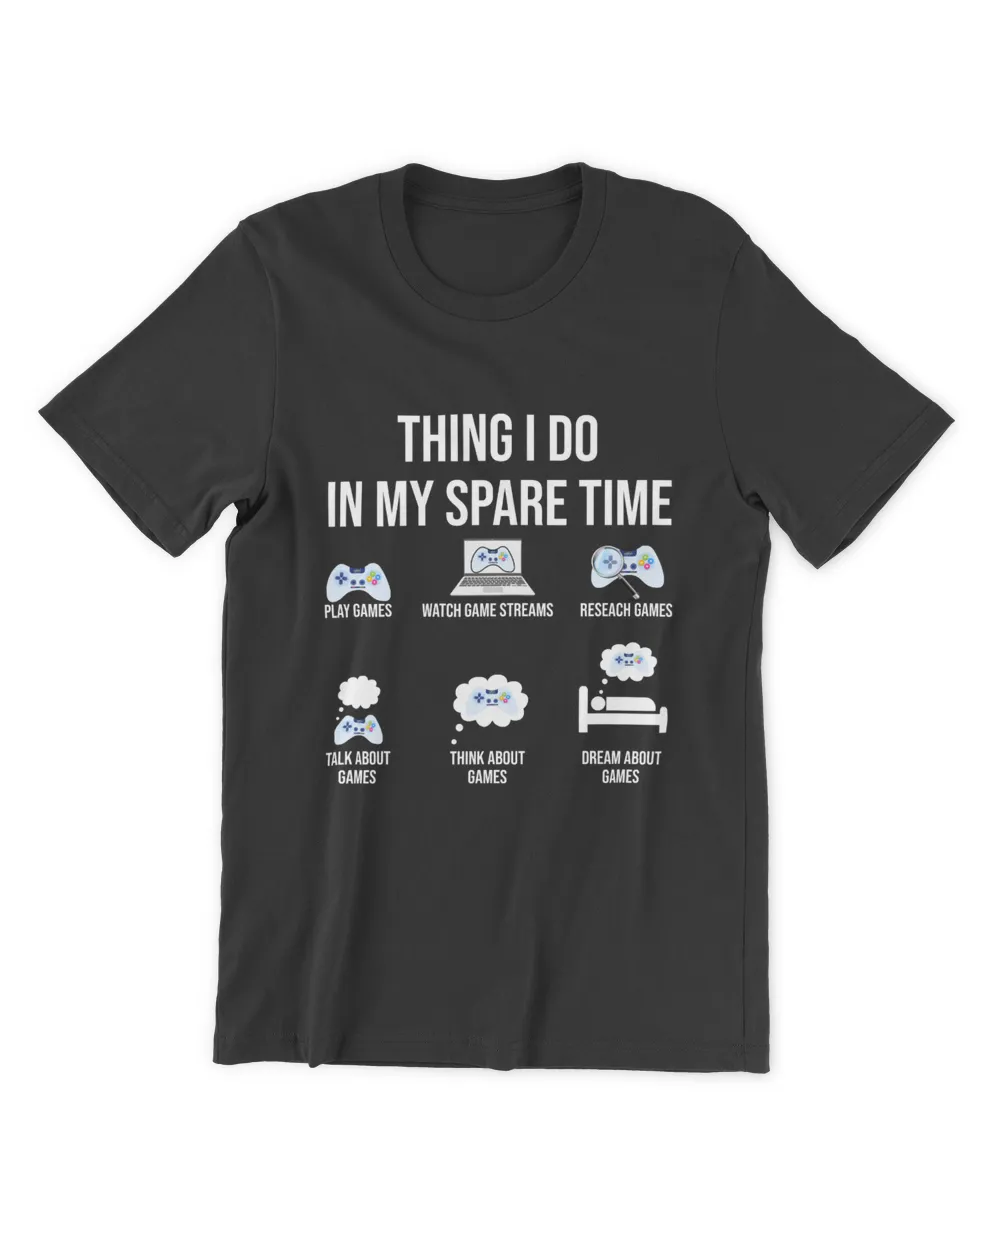 RD Video Games Shirt, Things I Do In My Spare Time Shirt, Gamer Shirt, Gamer Dad Shirt, Dad Gift, Dad Shirts